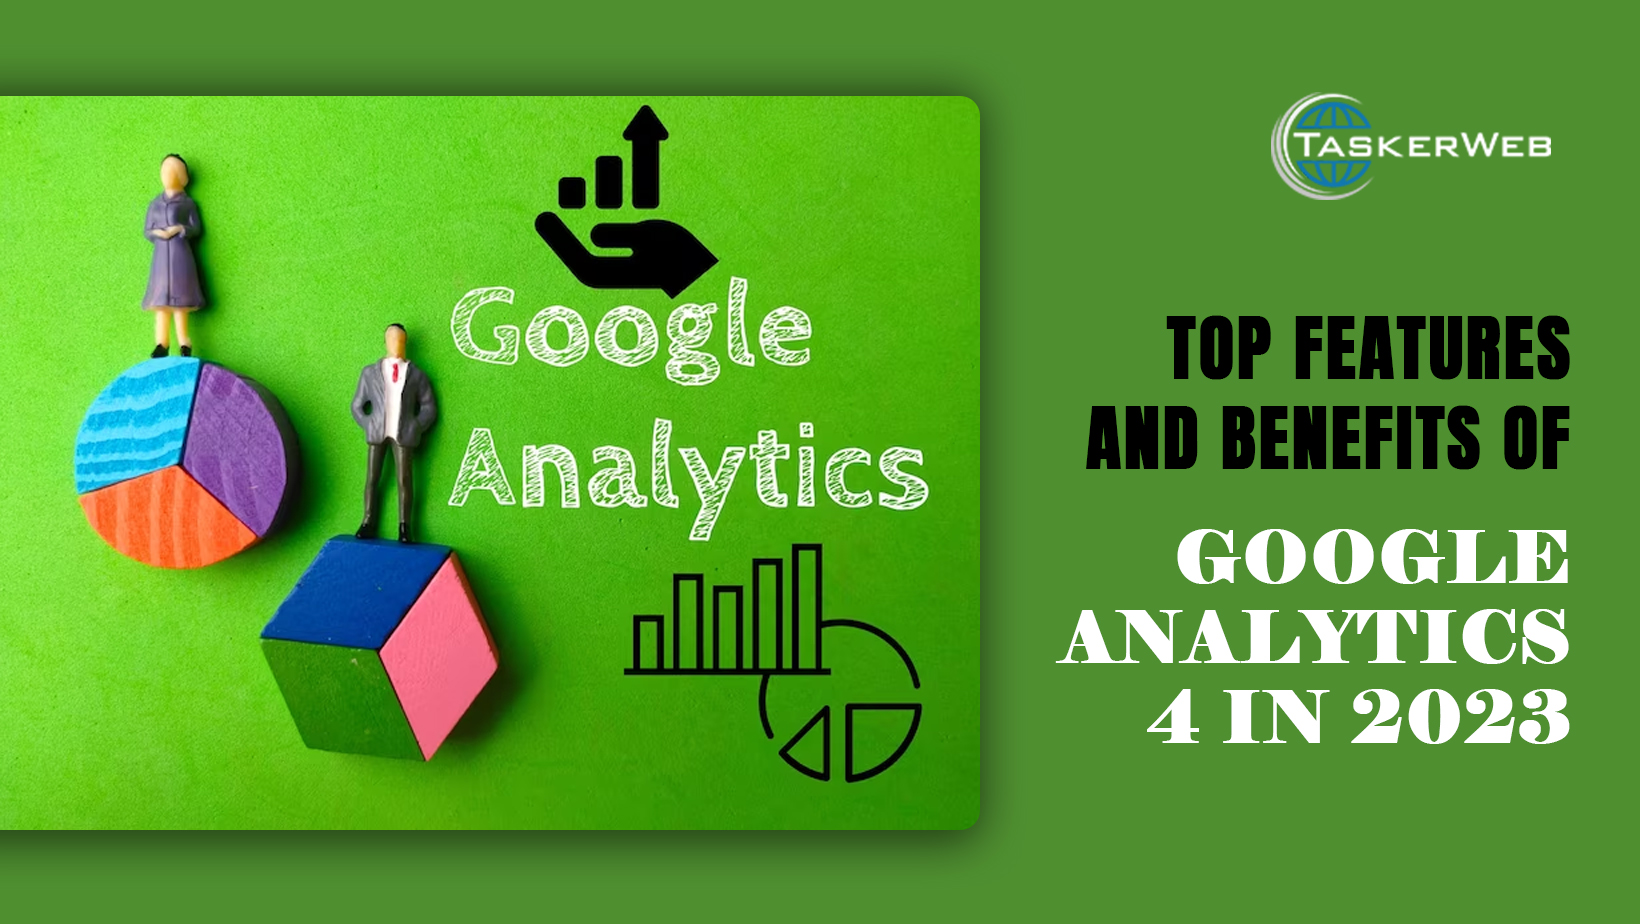 Top Features and Benefits of Google Analytics 4 in 2023